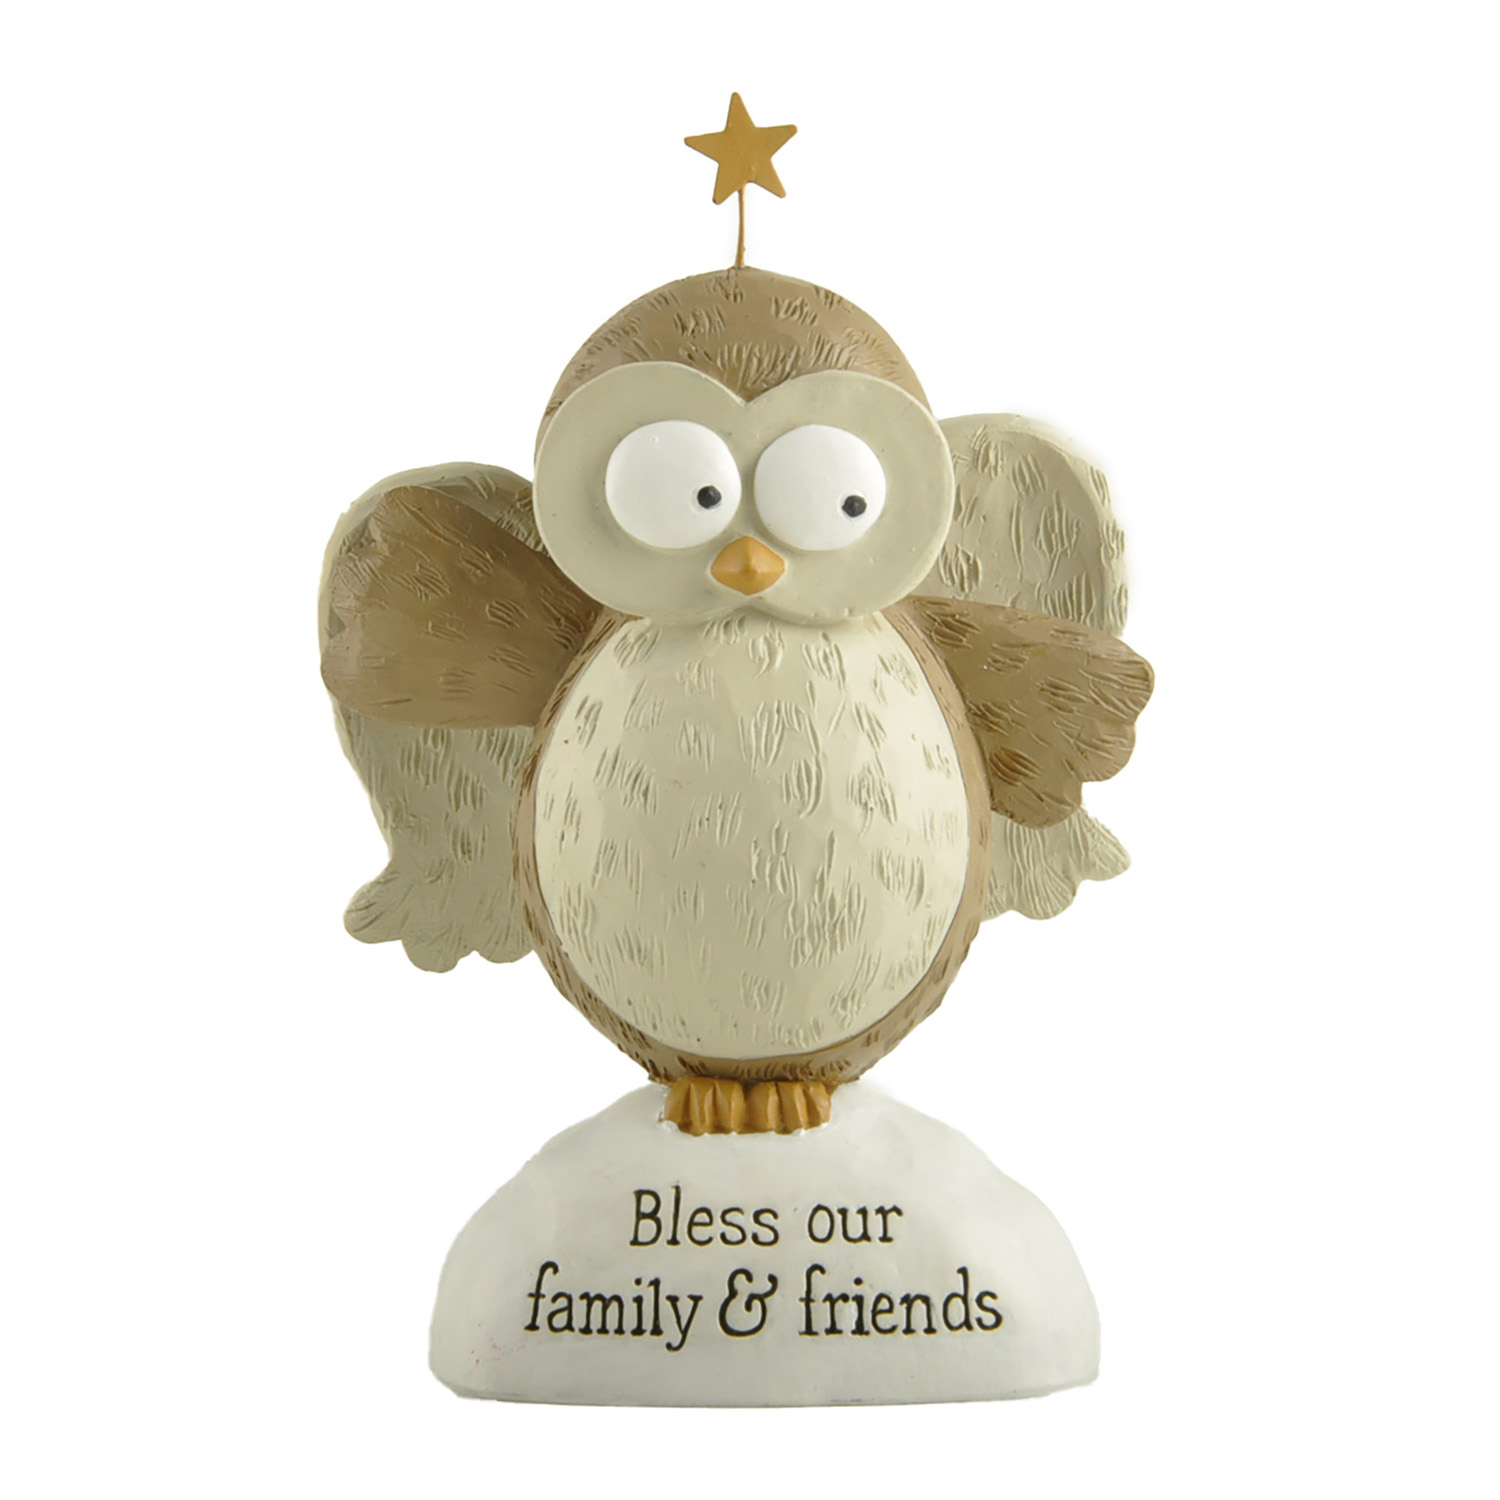 Inspirational Resin Owl Figurine with Star and Message – 'Prayers Go Up, Blessings Come Down' – Uplifting Home Decor 238-13900